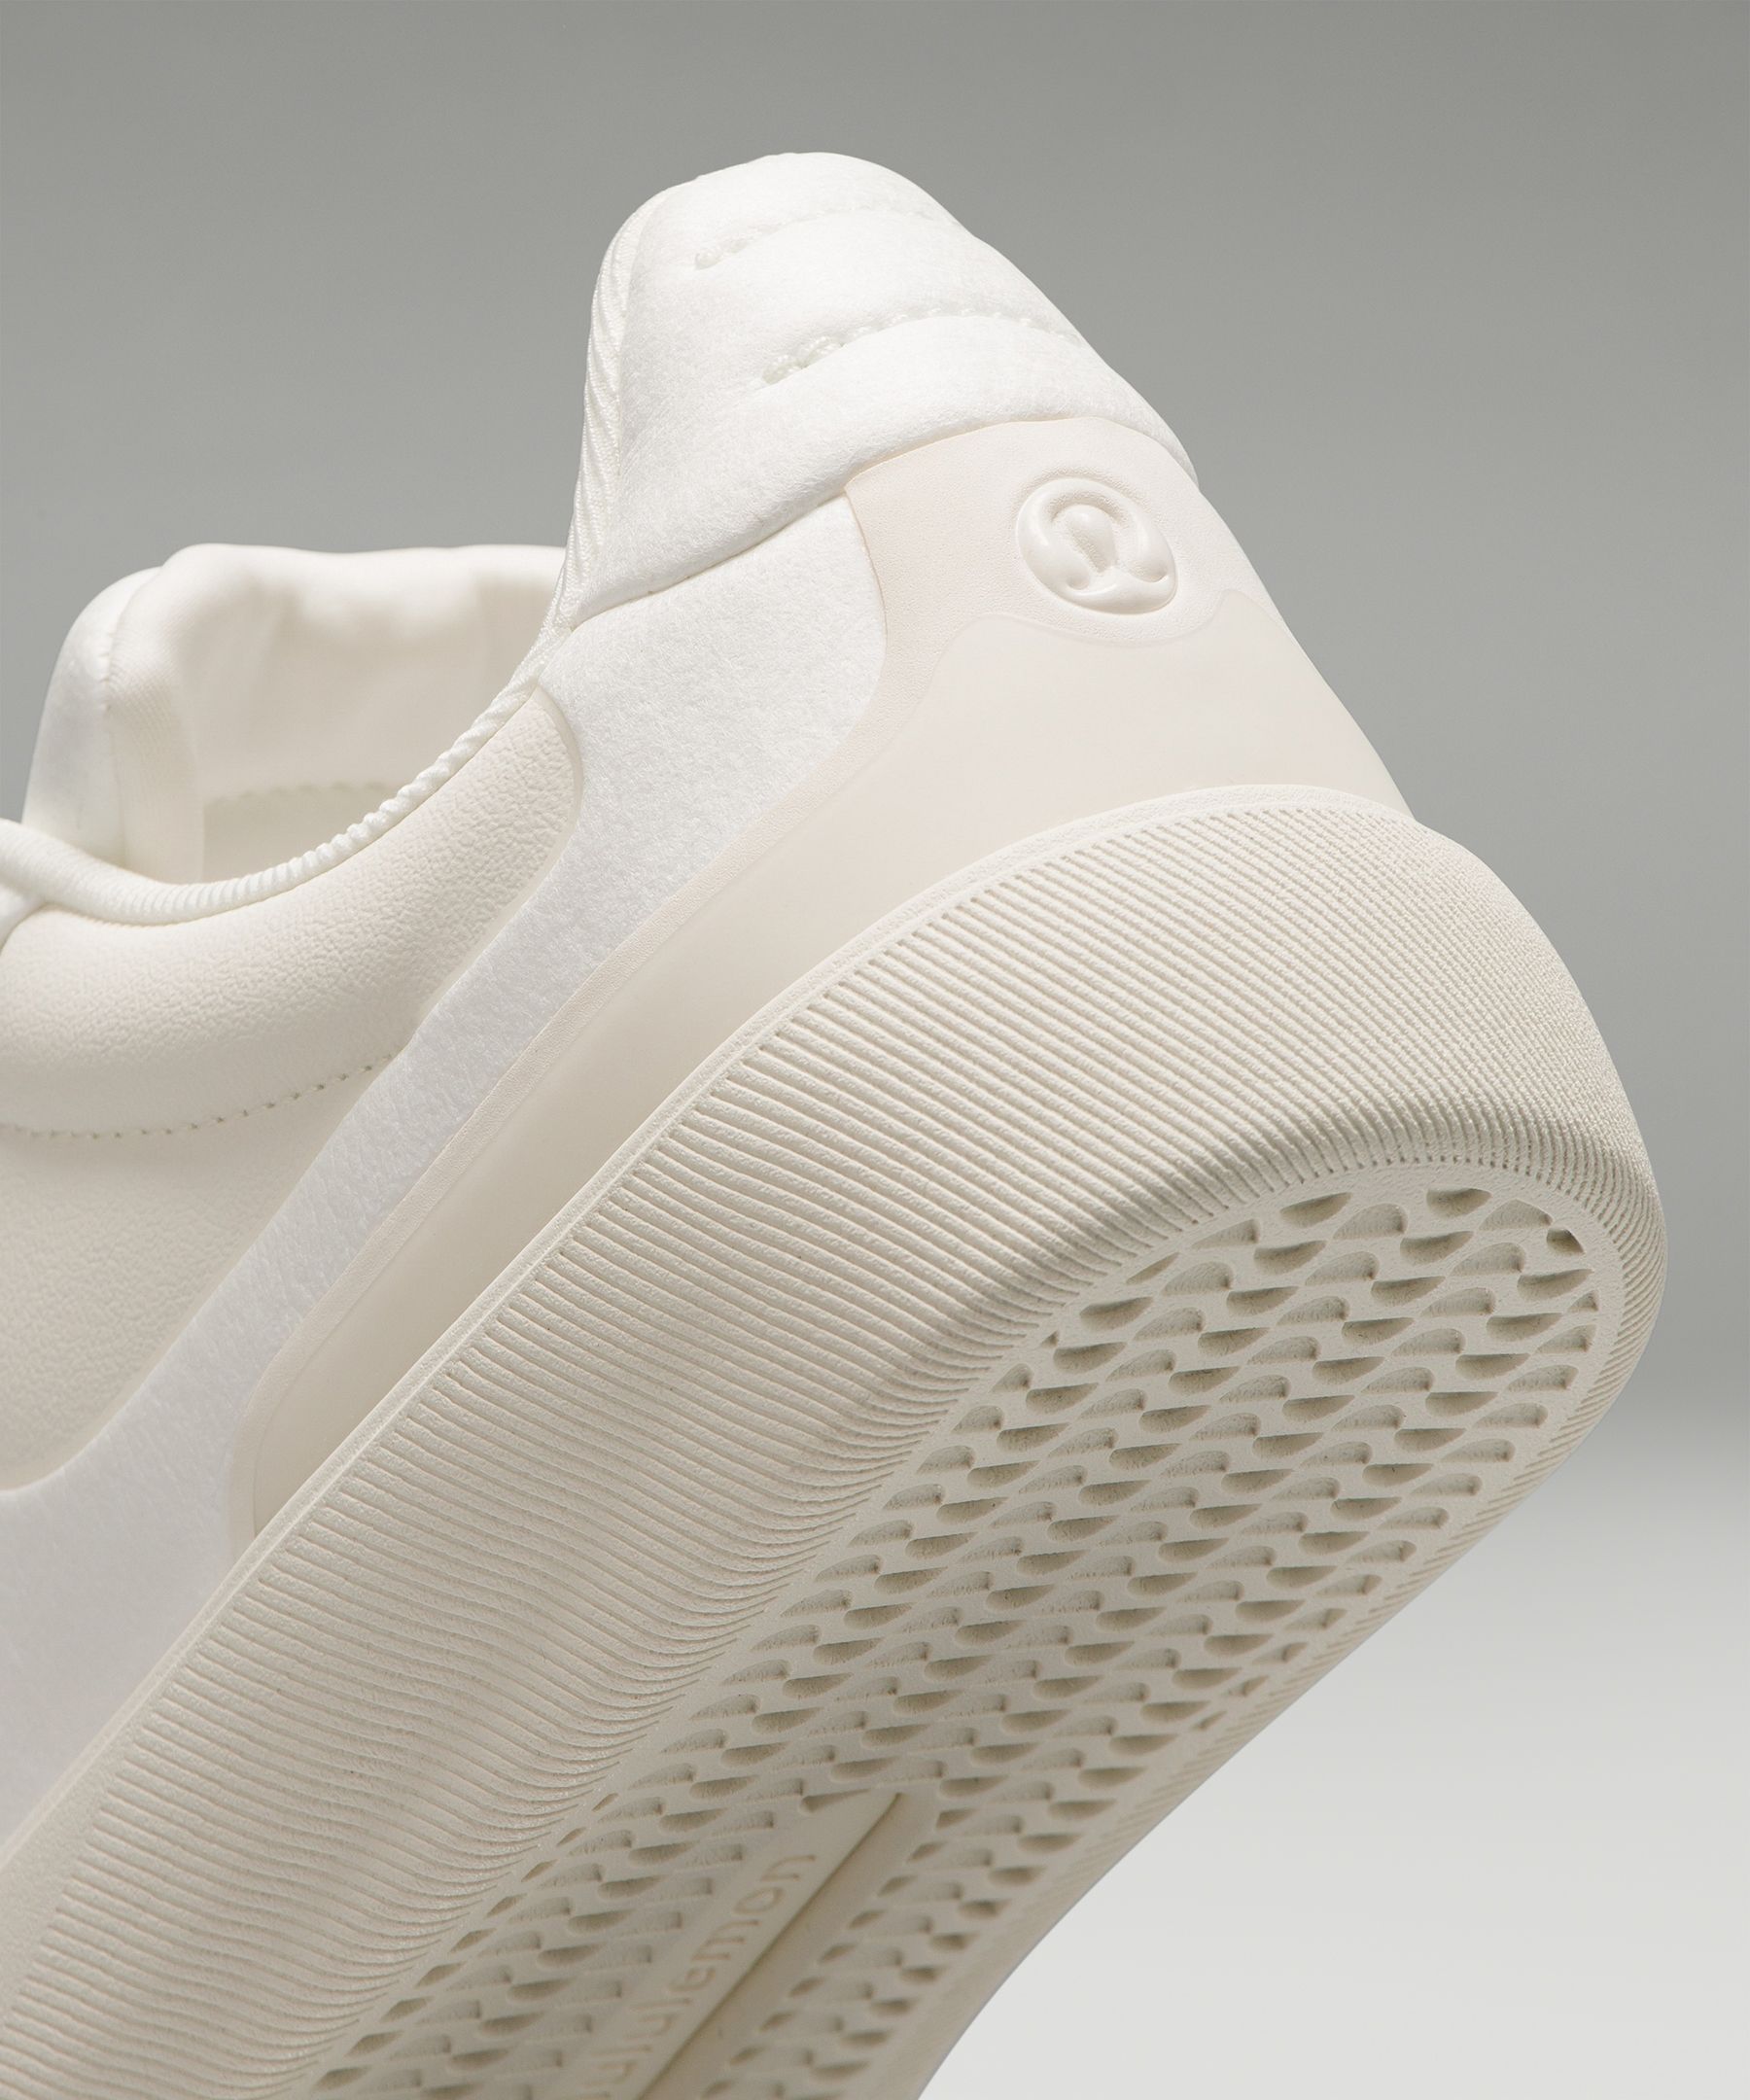 lululemon new Cityverse sneakers: Where to buy latest addition to 'star  lineup' 